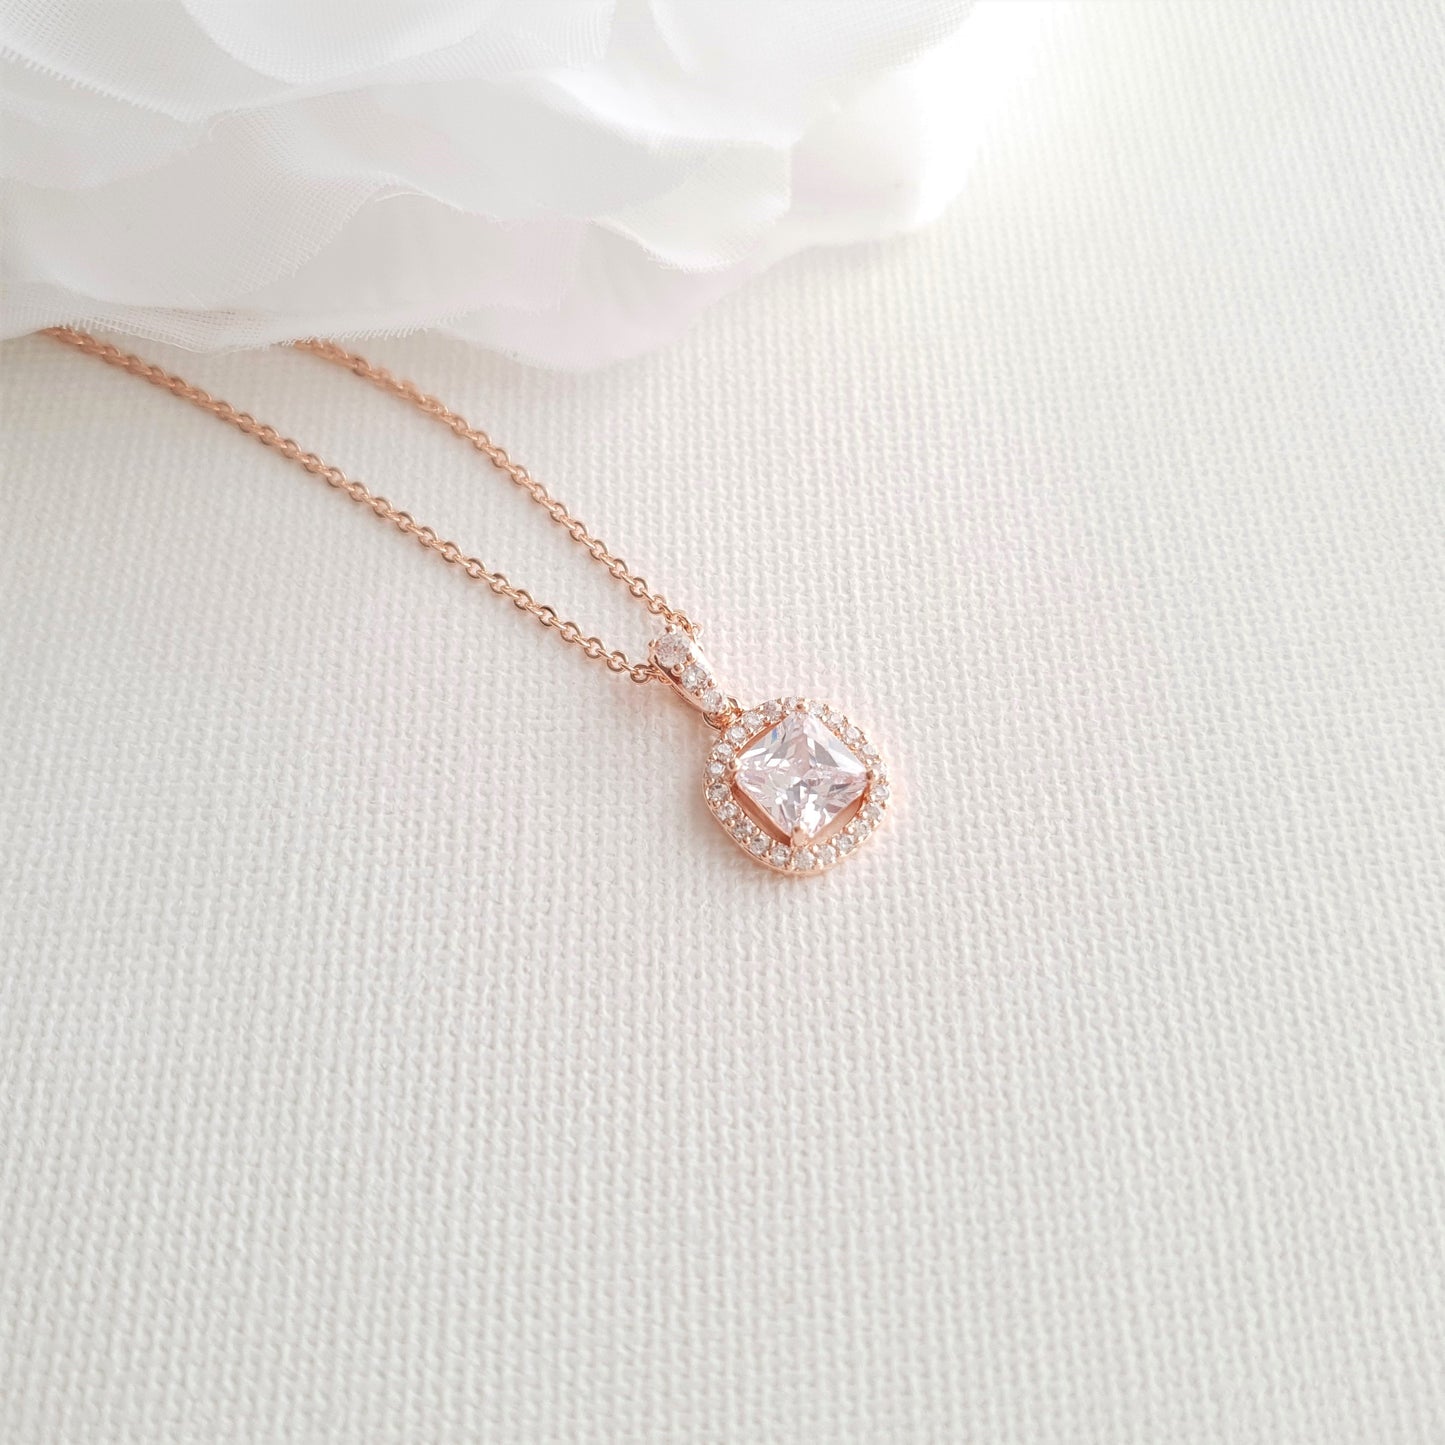 Wedding Jewelry Set for Bridesmaid in Rose Gold-Piper